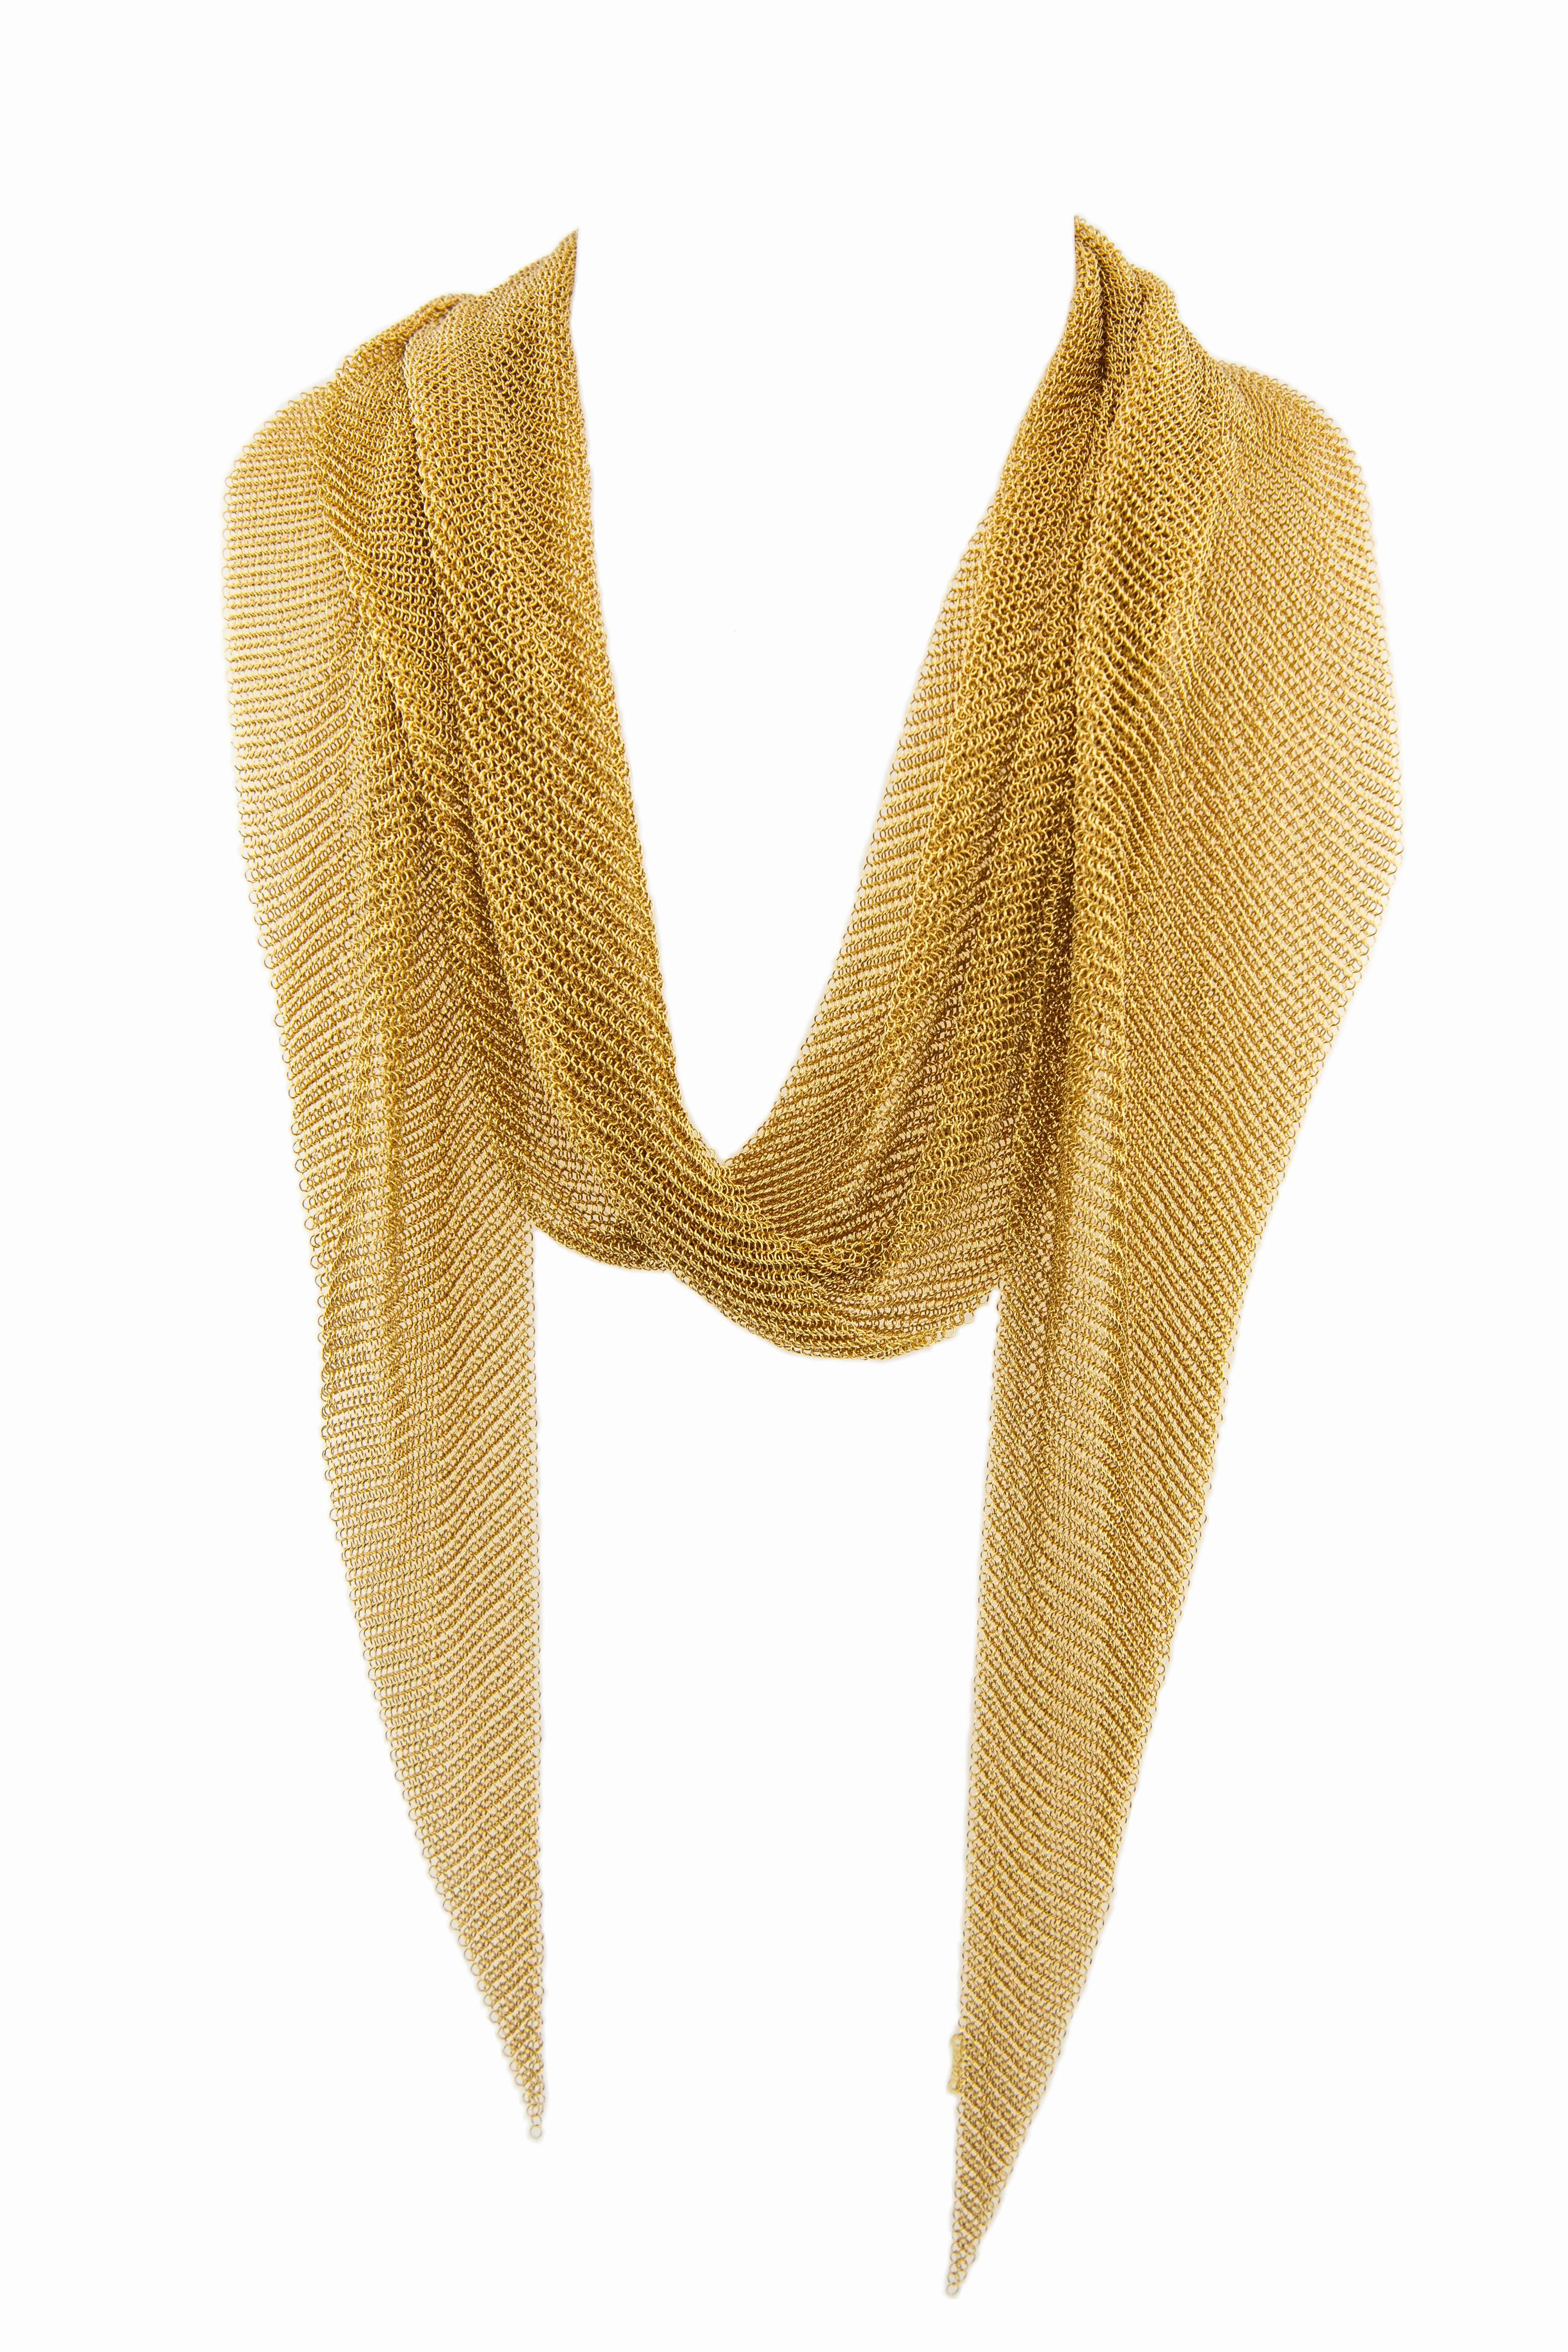 A contemporary mesh scarf and necklace in genuine 18k gold, designed by Tiffany & Co. and Italian jewelry designer Elsa Peretti (b. 1940-). Peretti, whose collaborations with Tiffany & Co. began as early as 1974, was inspired by the movement and